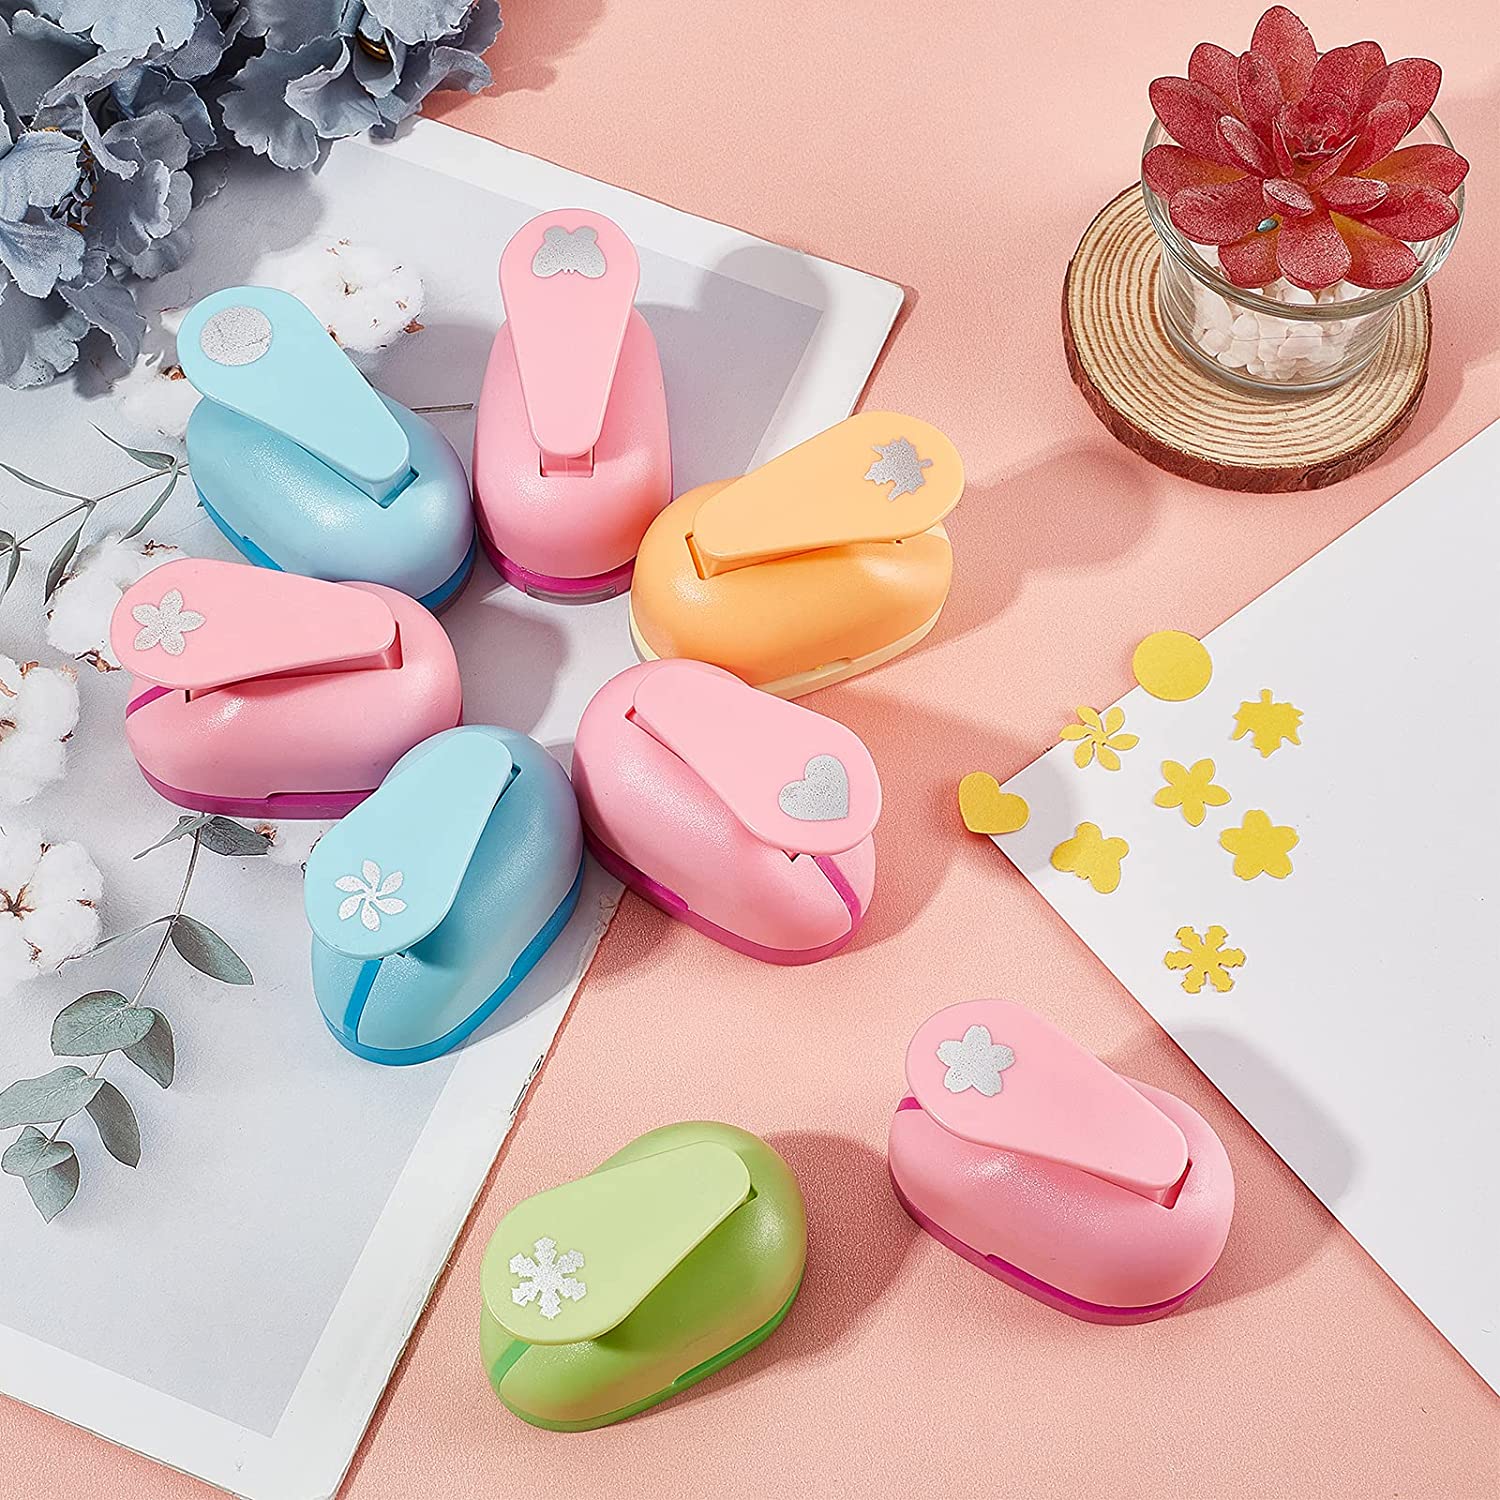 3/8 inch little girl shape craft punch DIY hole puncher scrapbook paper  cutter scrapbooking kids design punches Embossing device